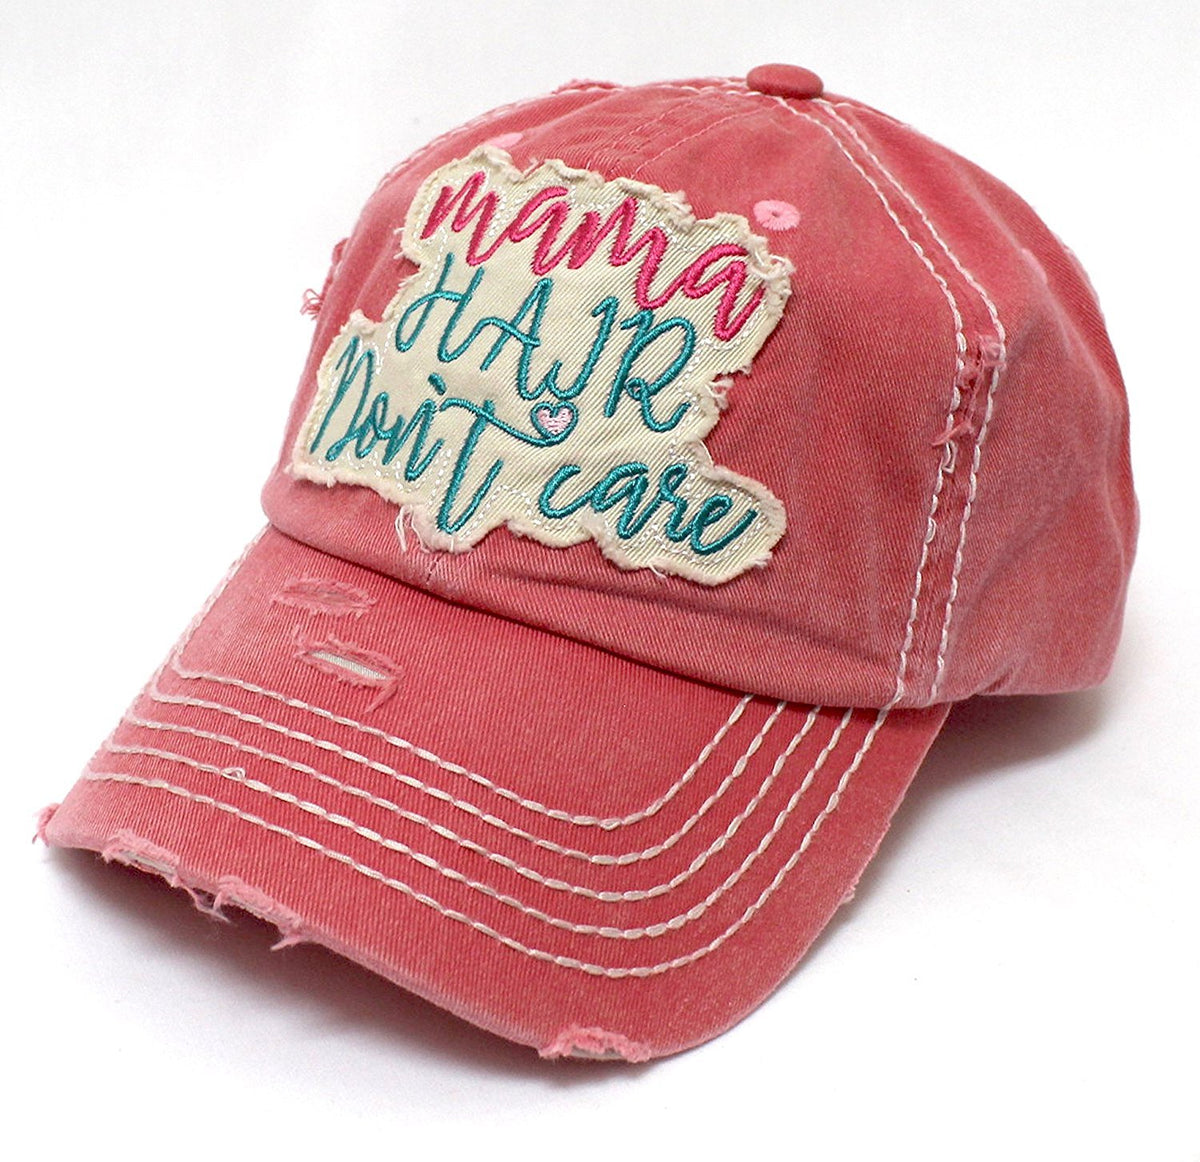 Women's "MAMA HAIR DON'T CARE" Patch Embroidery Vintage Hat Cap - Caps 'N Vintage 